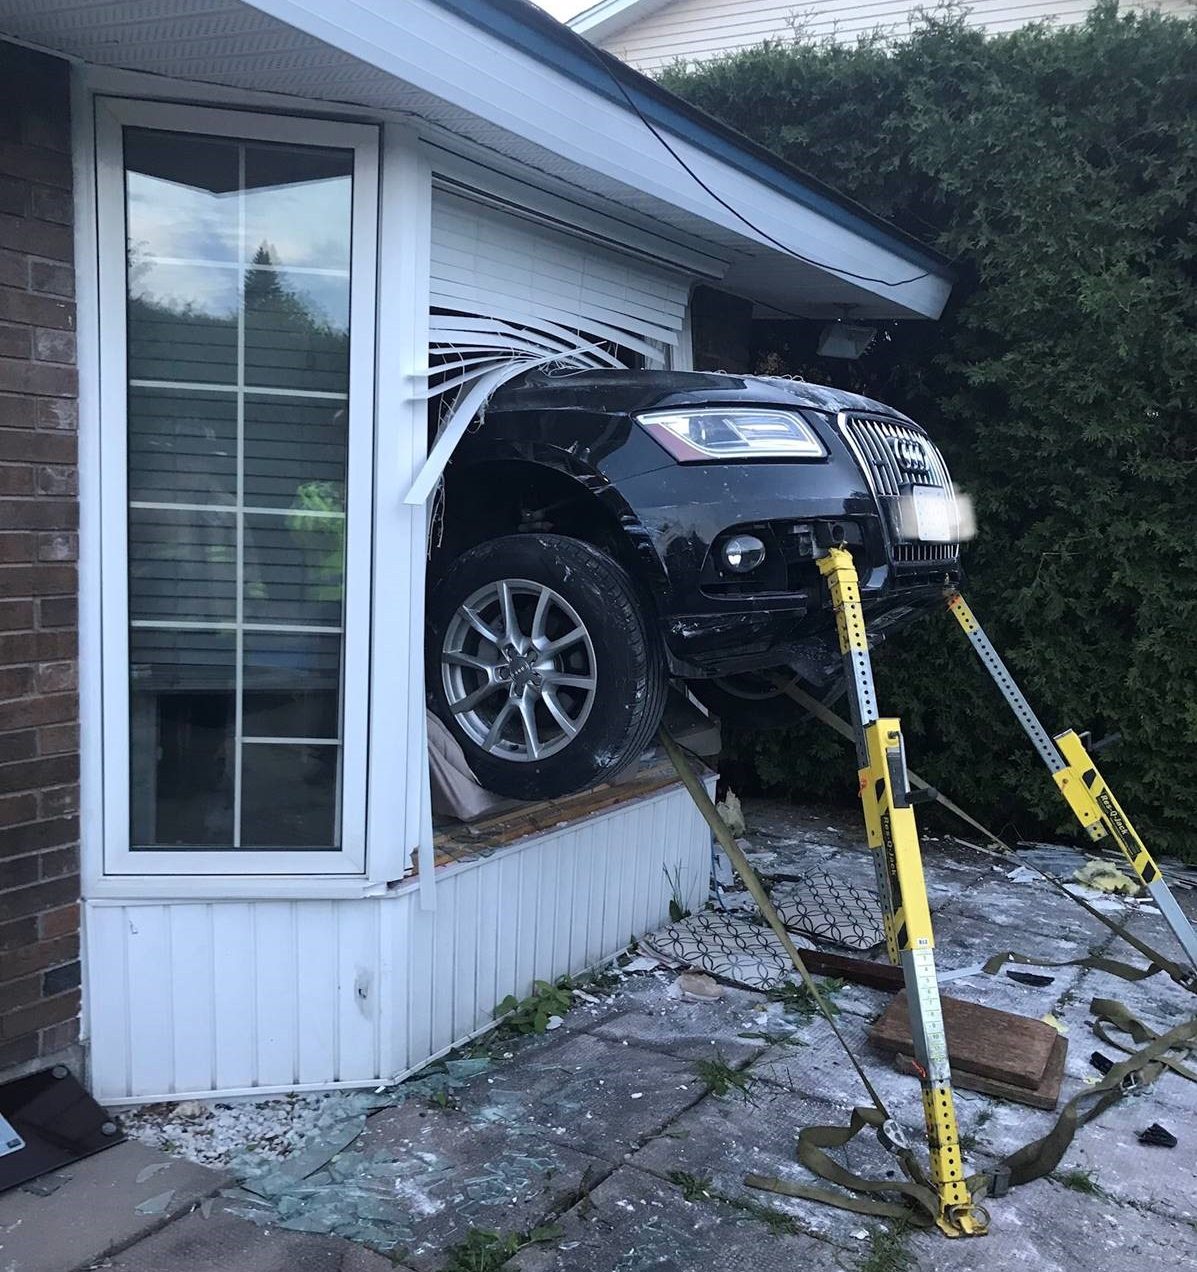 Ottawa fire says it's "a miracle" only one person sustained minor injuries after a car smashed through the living room of a home on Ingram Crescent on Monday.